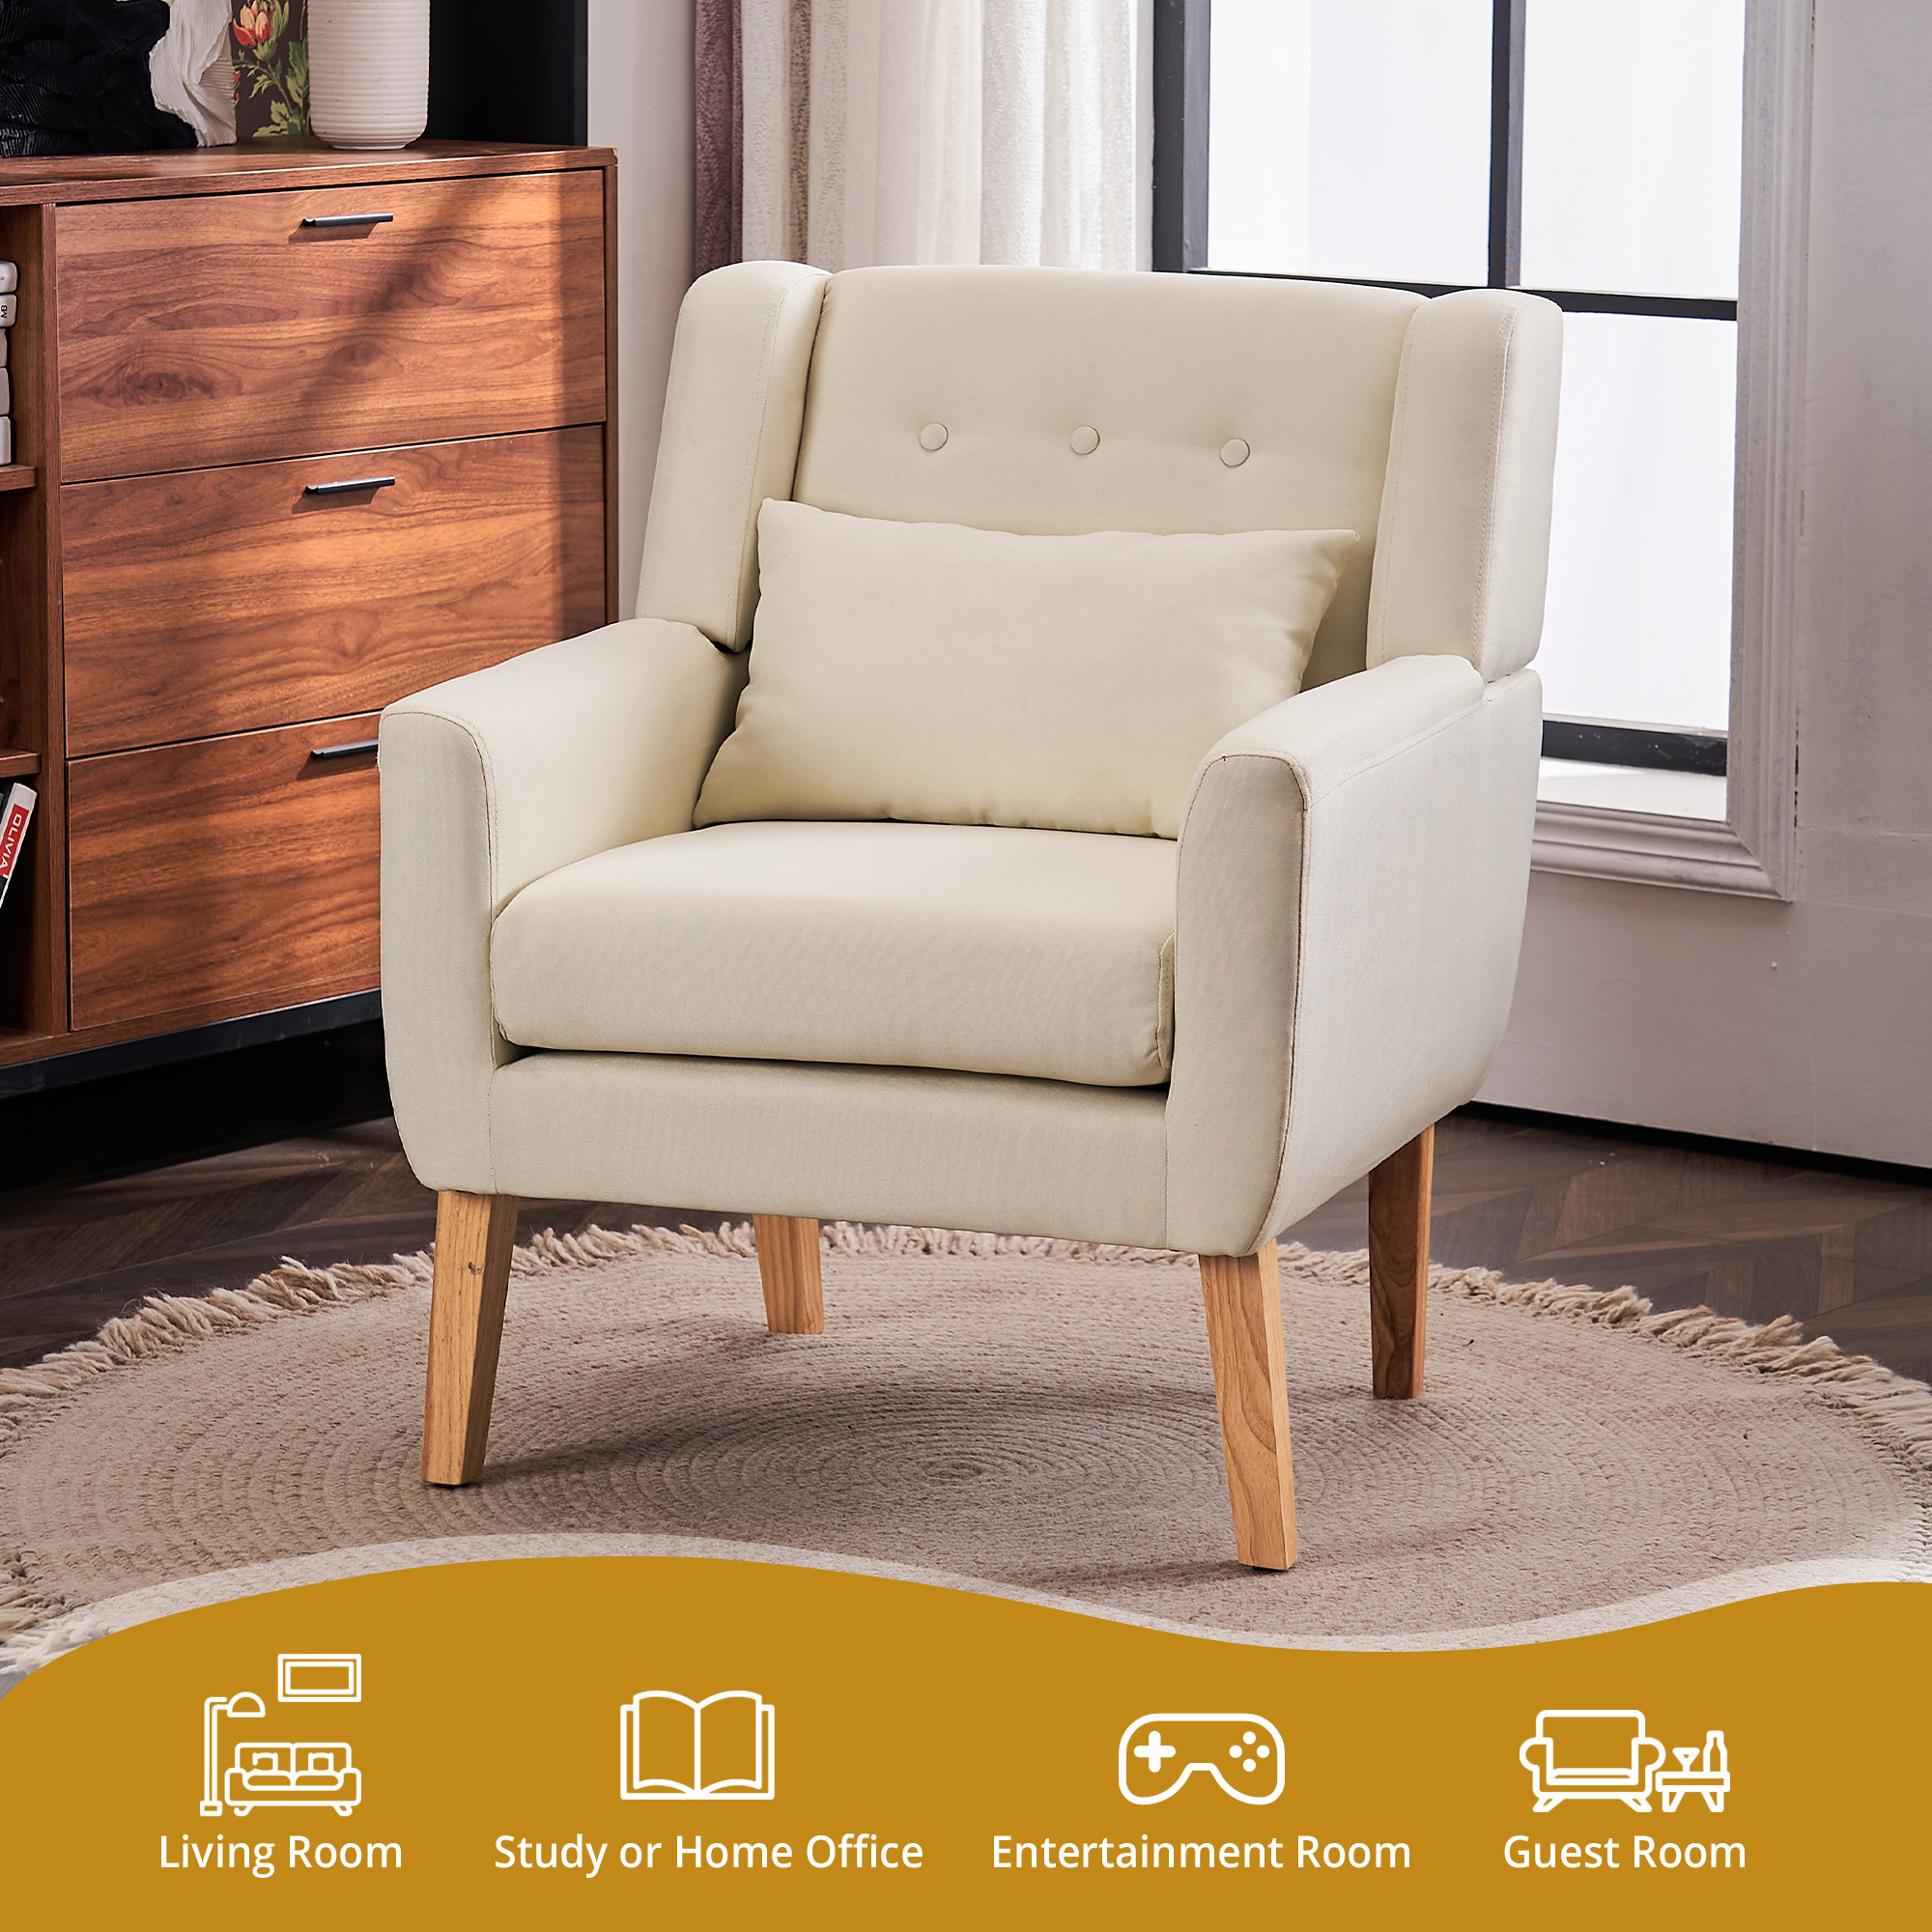 Upholstered Linen Bottom Storage Button Tufted Accent Chair With Lumbar Pillow, Sofa Chair With Rubber Wood Legs